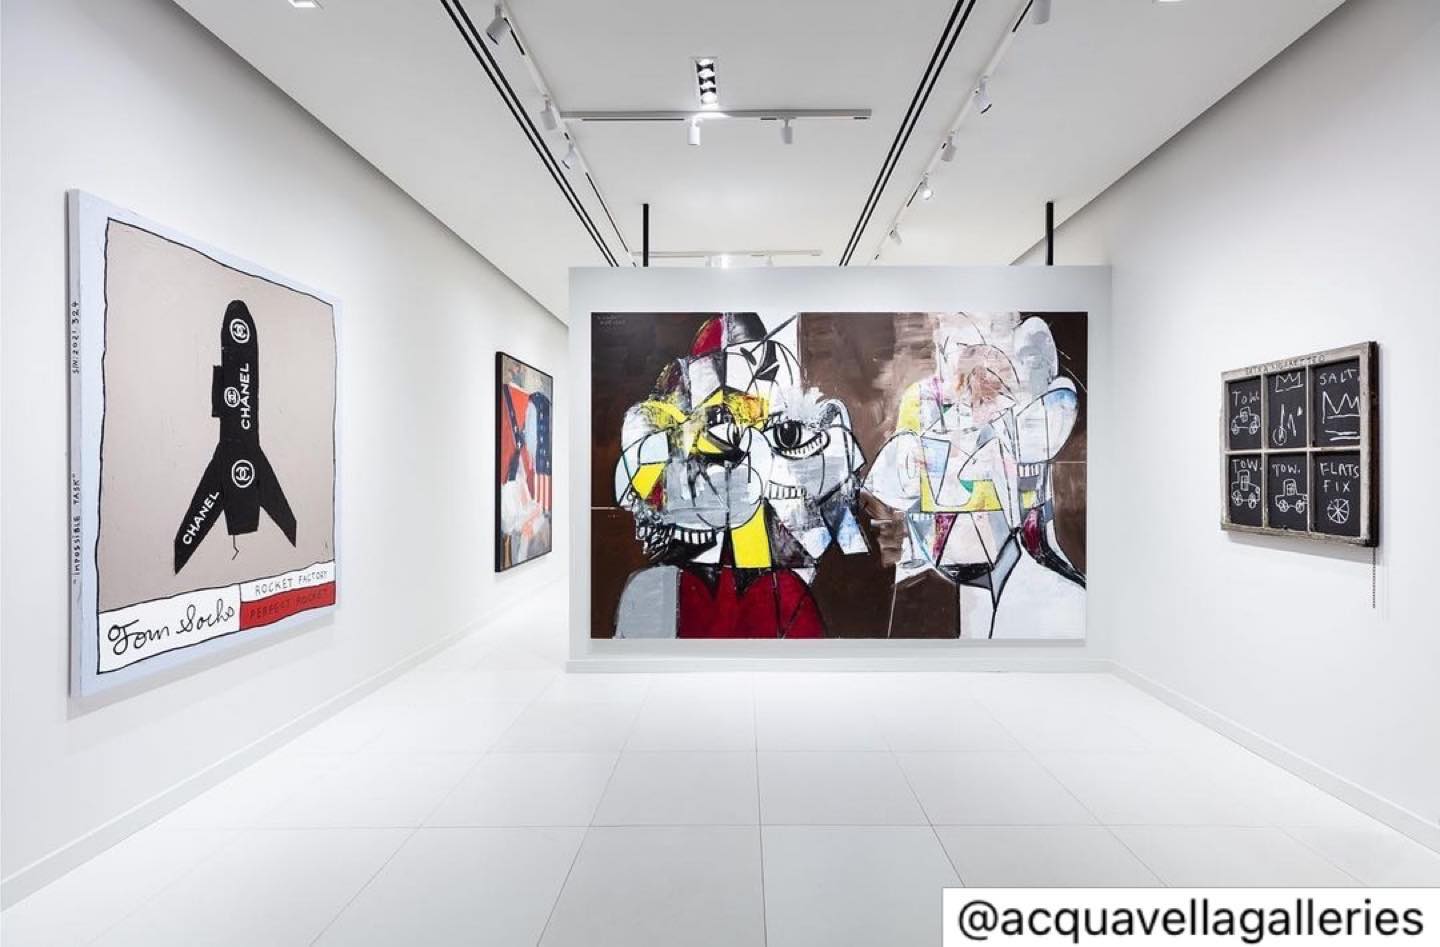 Great show at #AcquavellaGalleries in Palm Beach.
.

Our exhibition “Calder to Condo” is now open in our Palm Beach gallery! A group show, the exhibition features work by #FrancisBacon, #LouiseBourgeois, #JeanMichelBasquiat, #AlexanderCalder, #GeorgeCondo, #GiorgiodeChirico, #JoanMiró, #LarryRivers, #TomSachs, and #TomWesselmann. 

The show is up at the gallery through February 2nd. Come and visit us at @theroyalpoincianaplaza, we are open seven days a week, Mondays-Saturdays from 10 am to 6 pm and Sundays from 11 am to 5 pm!
 
#CaldertoCondo #AcquavellaPB #Acquavella #AcquavellaGalleries

Photo by @silviaros.photo